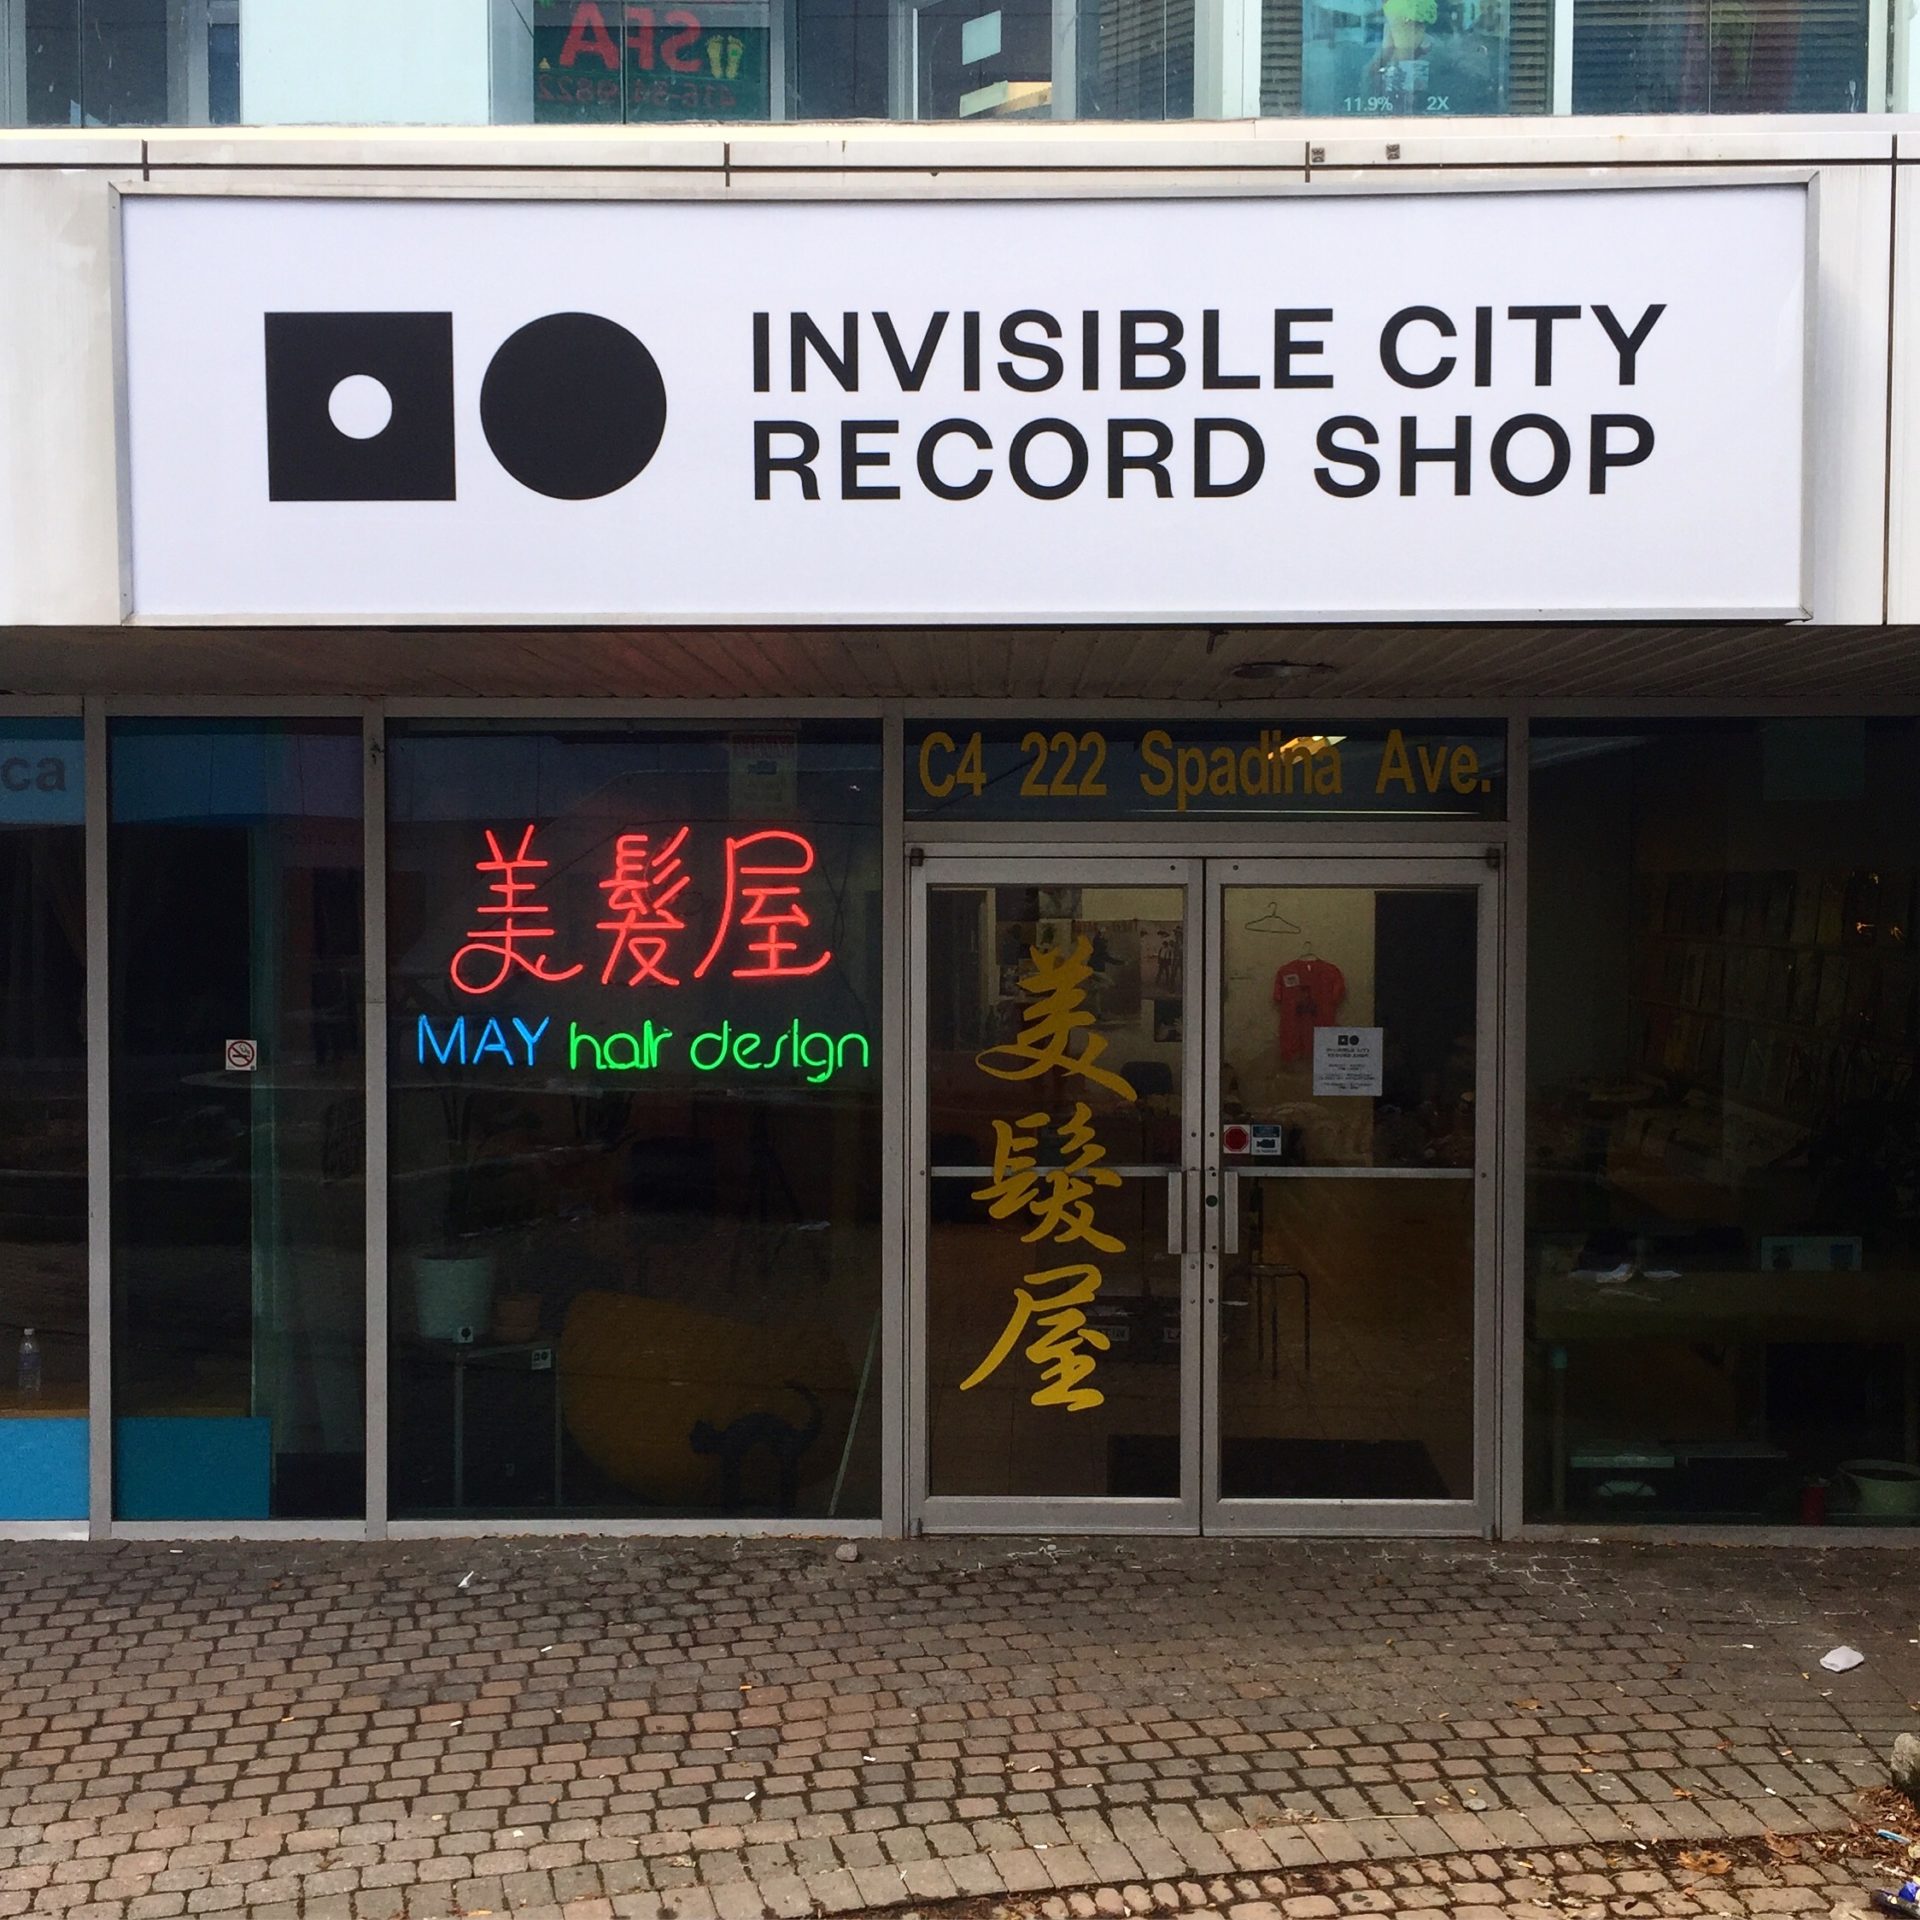 Invisible City Record Shop - 1 of 1